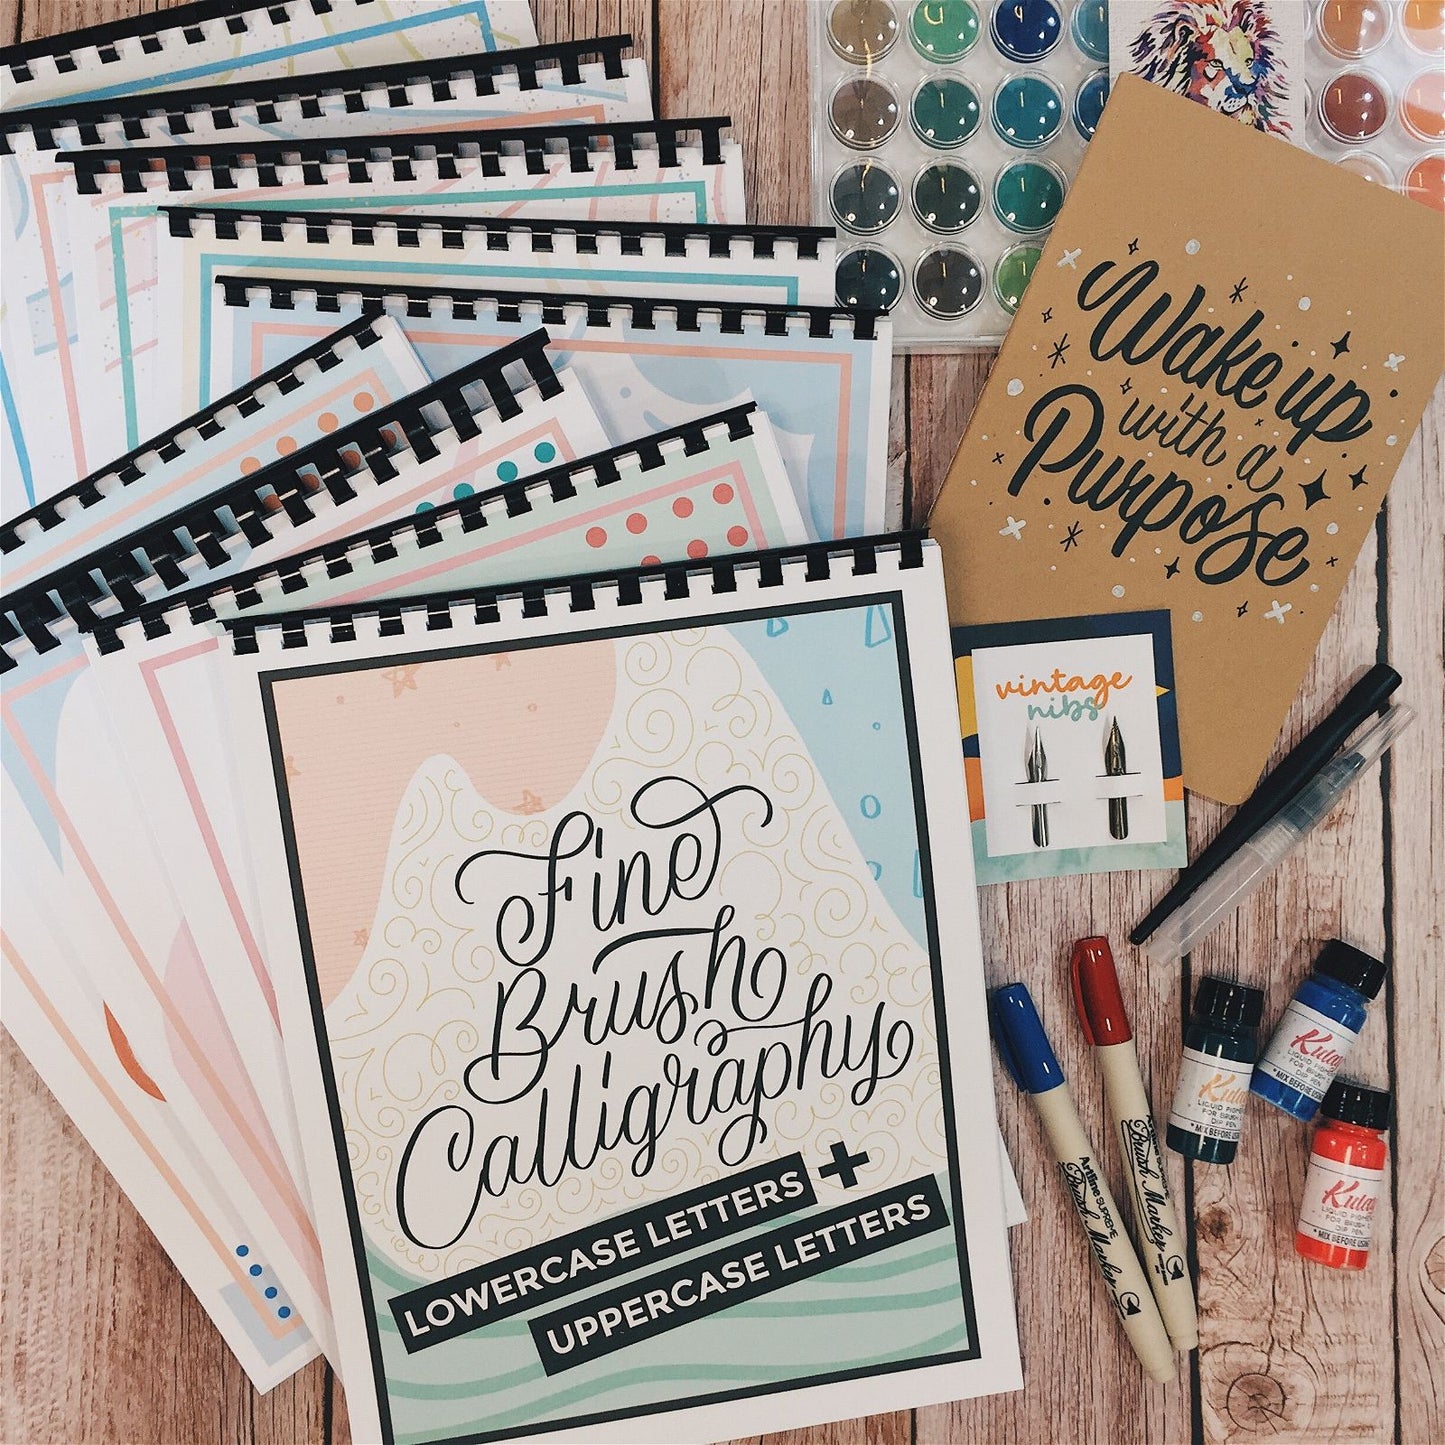 PACKAGE 1: Ultimate Creativity Kit - Creative Workshops MNL